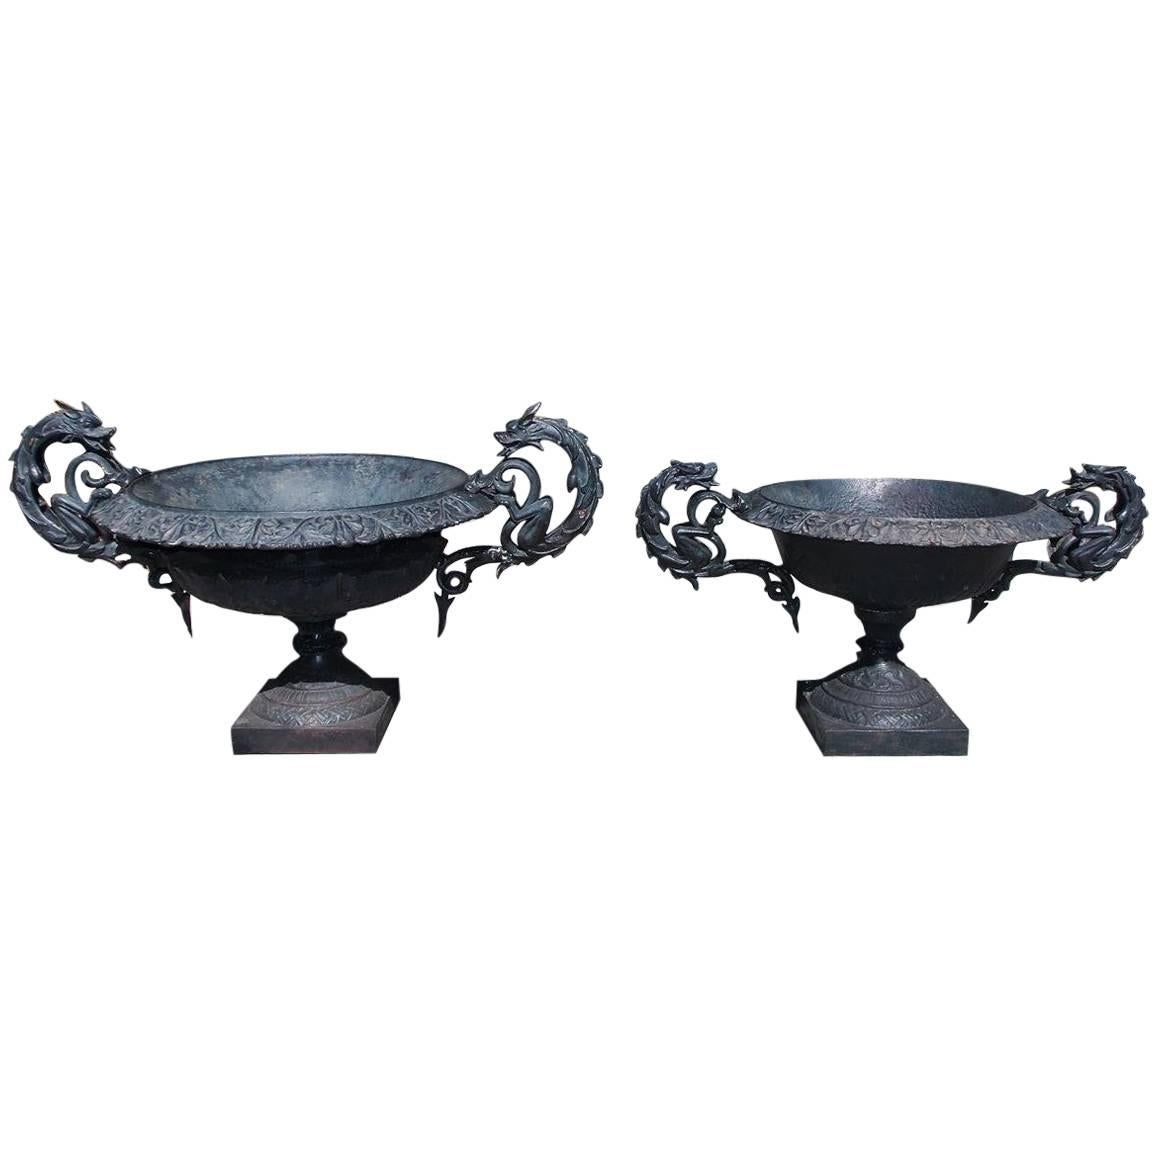 Pair of American Cast Iron and Painted Garden Planters, Circa 1825